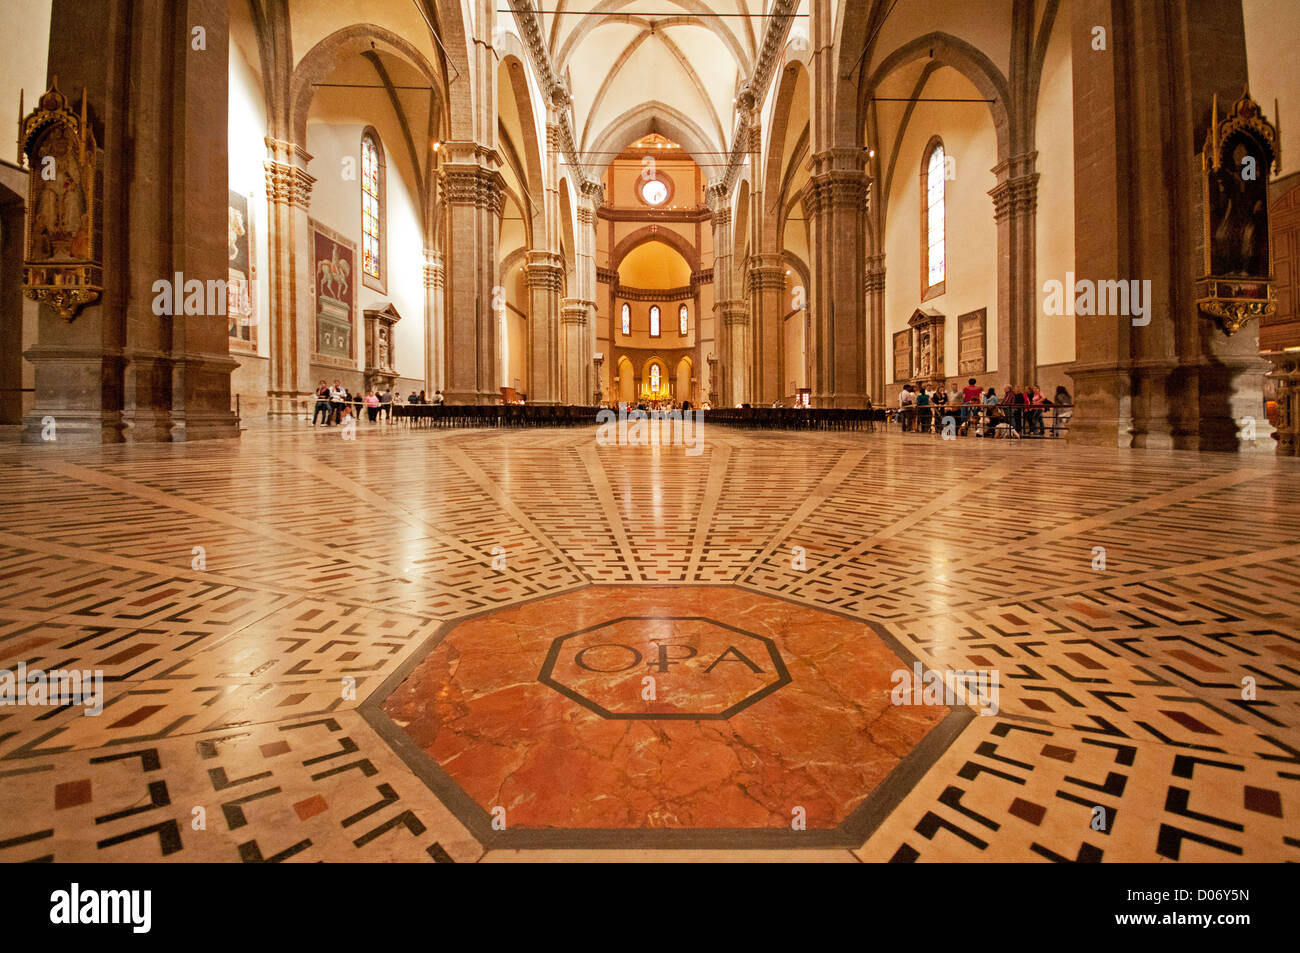 Interior of Florence Cathedral Duomo Santa Maria del Fiore showing beautiful marble floor with OPA sign Stock Photo